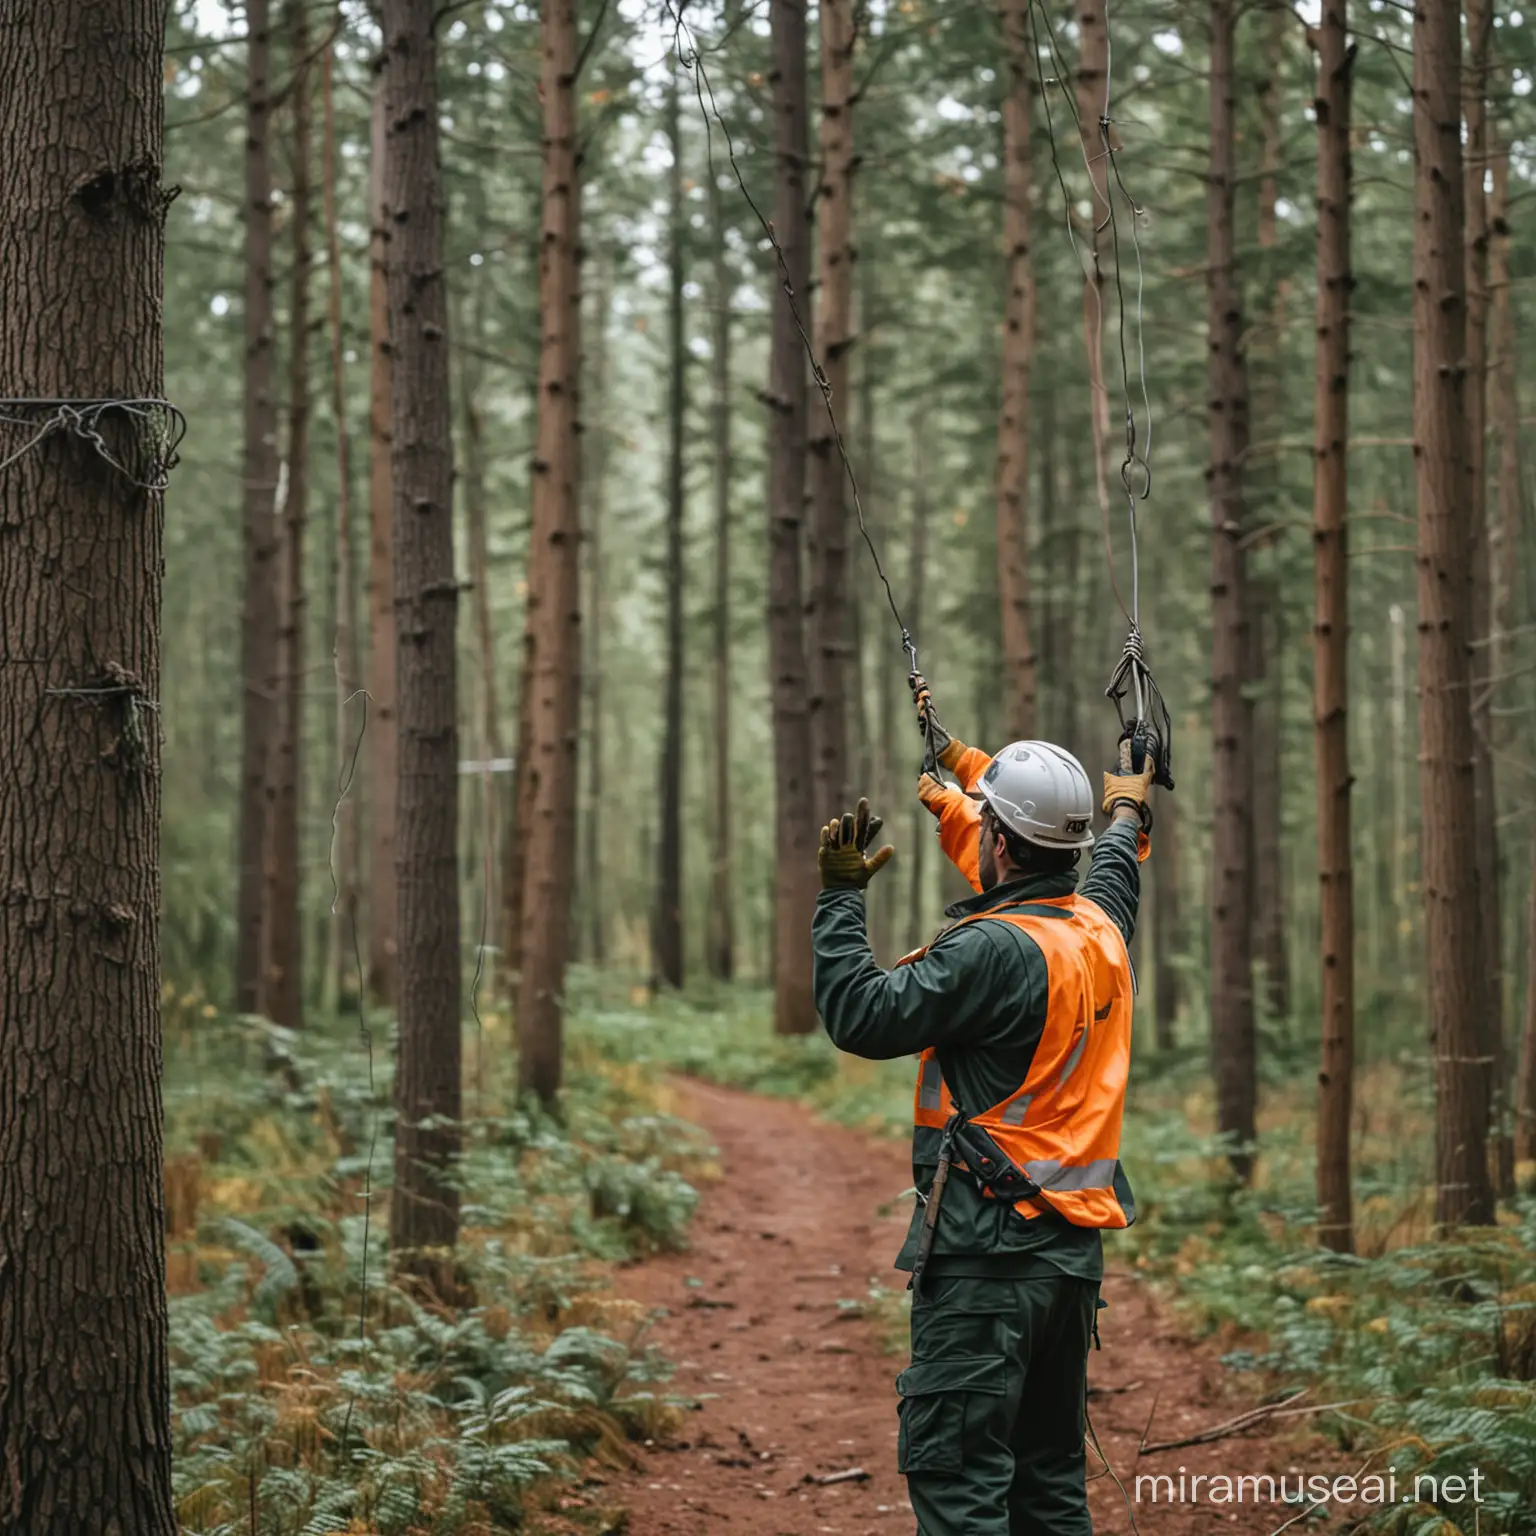 A forest worker walking, two hands raised in the air  and pulling a cable attached to a tree branch in the forest.